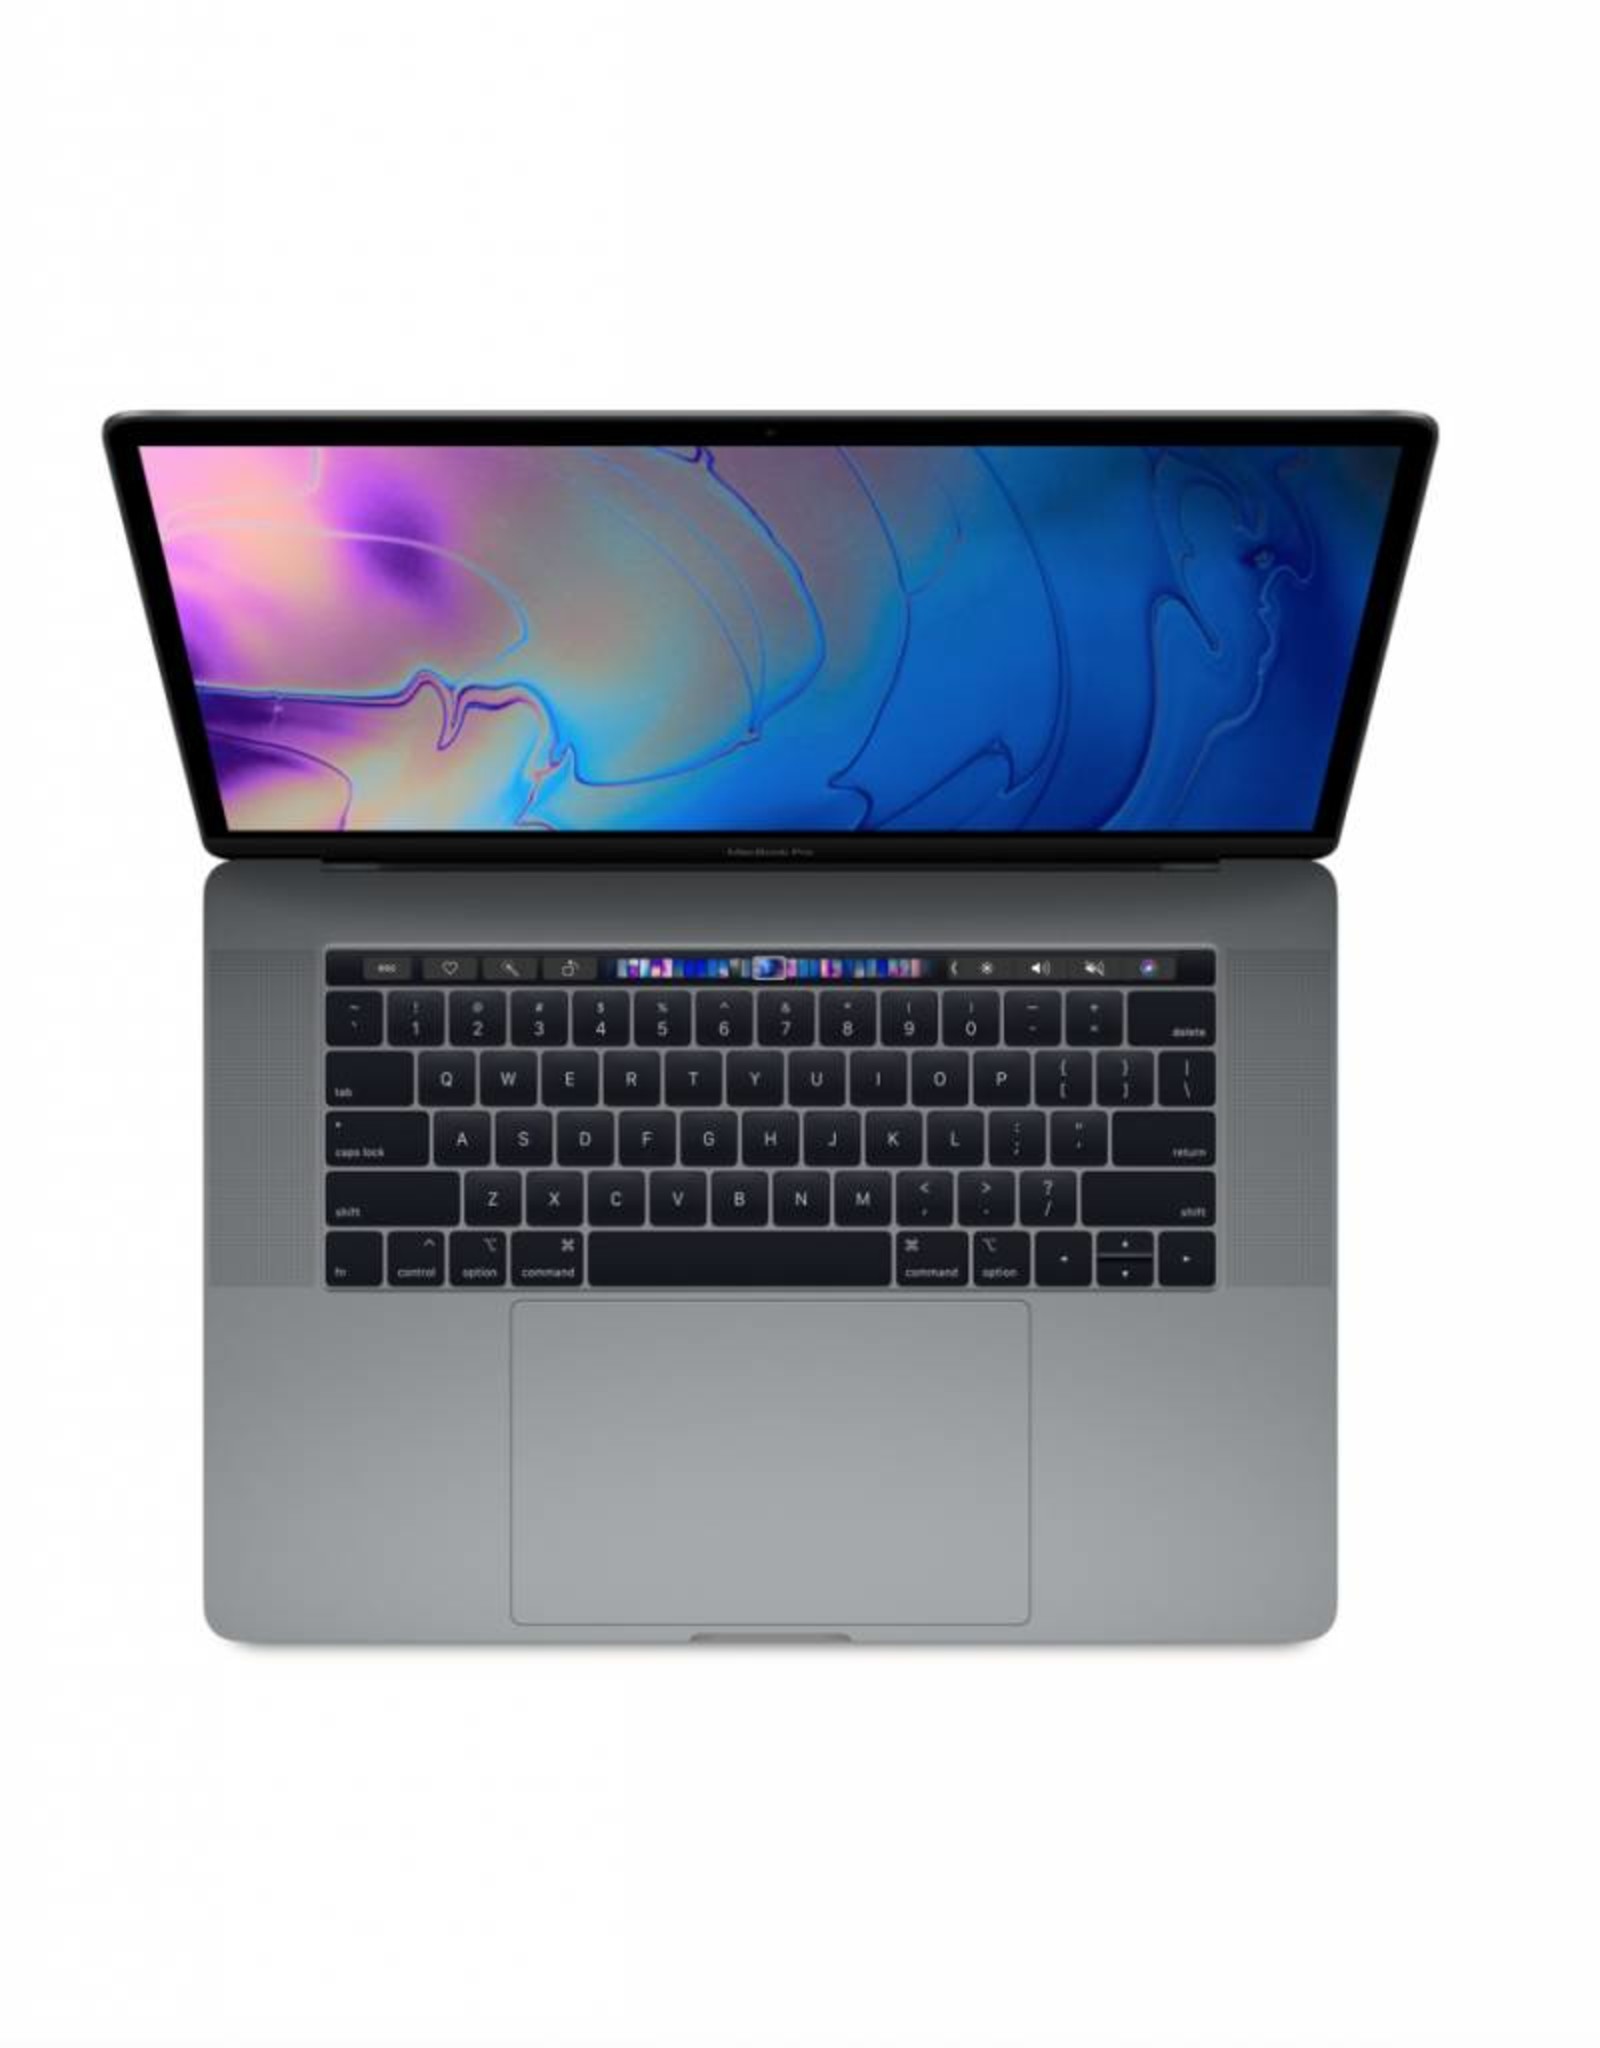 Apple Macbook Pro 15 Laptop With Touch Bar Dartmouth The Computer Store